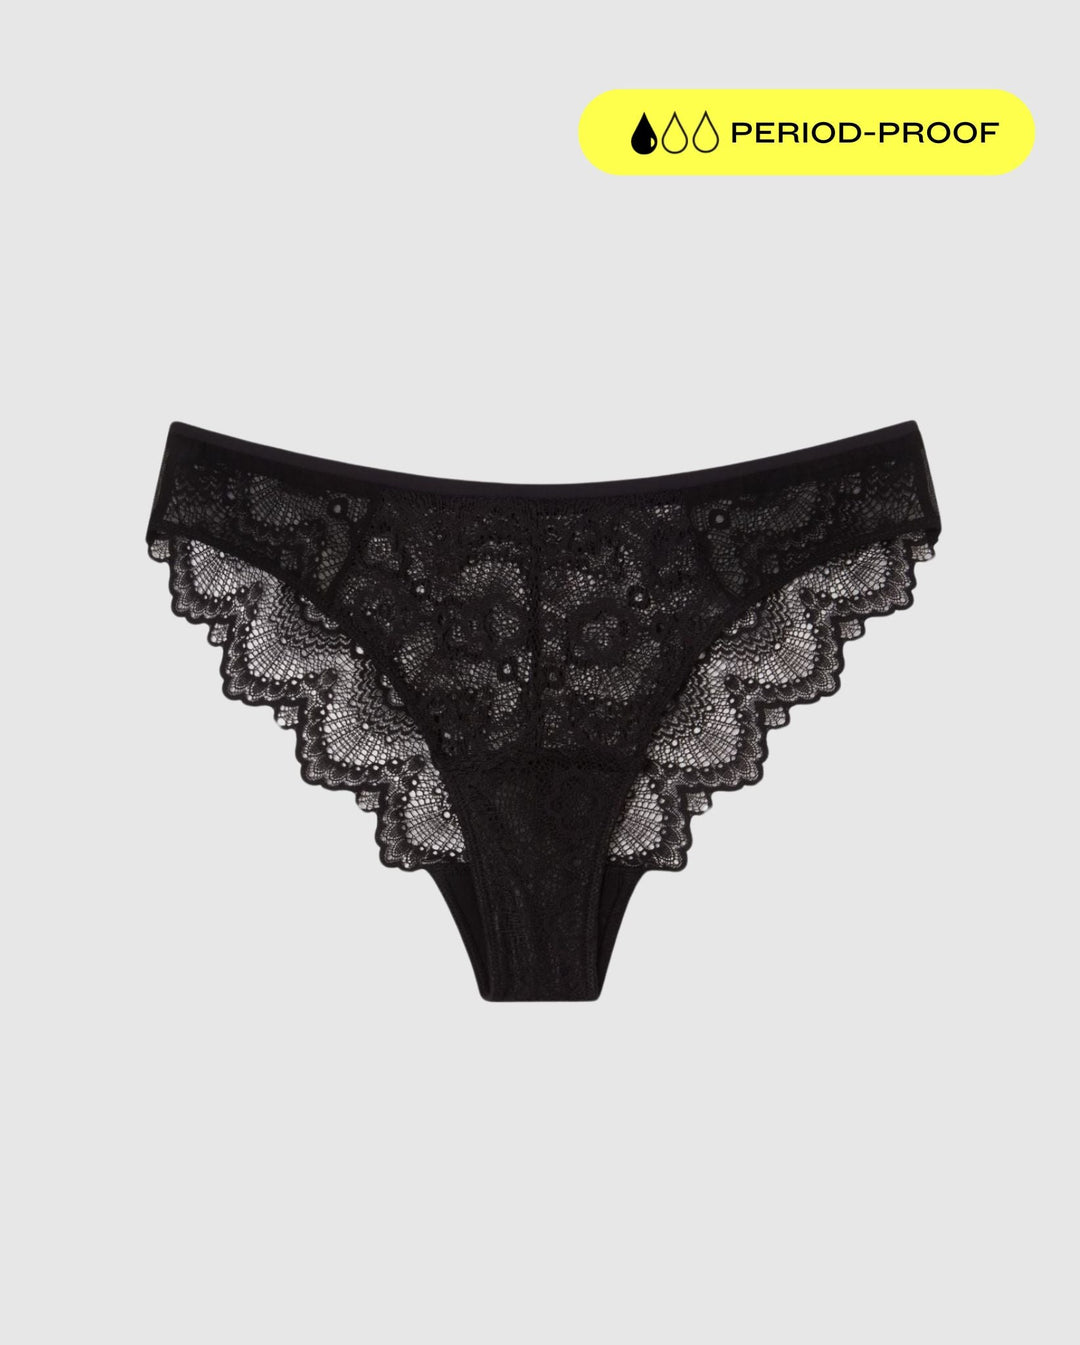 Lace Period Cheeky Black